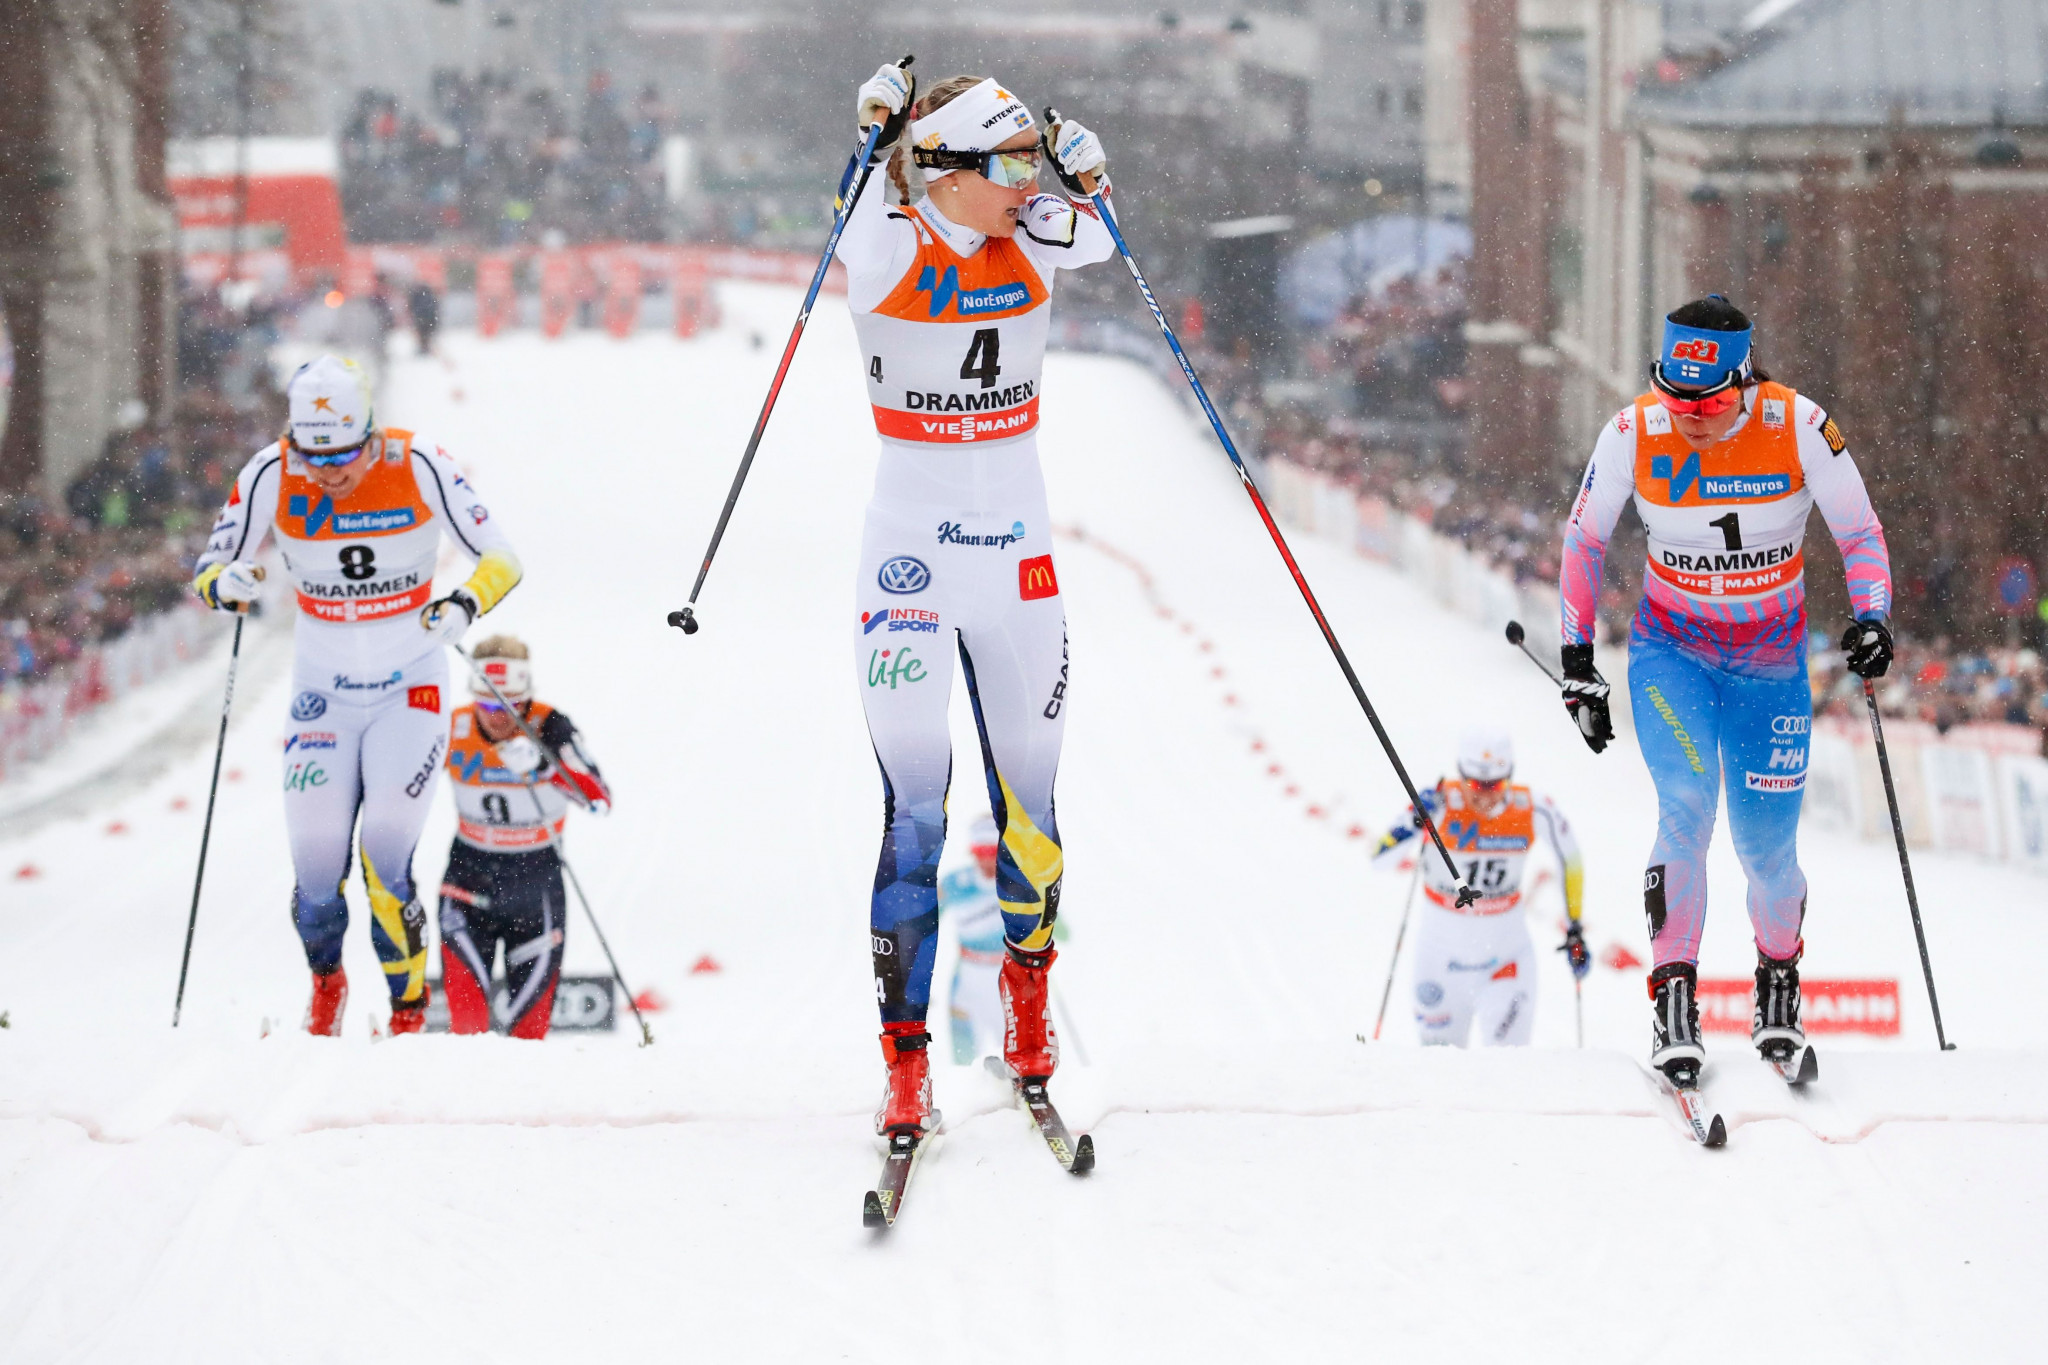 Stina Nilsson will be hoping to return to winning form in Davos ©Getty Images